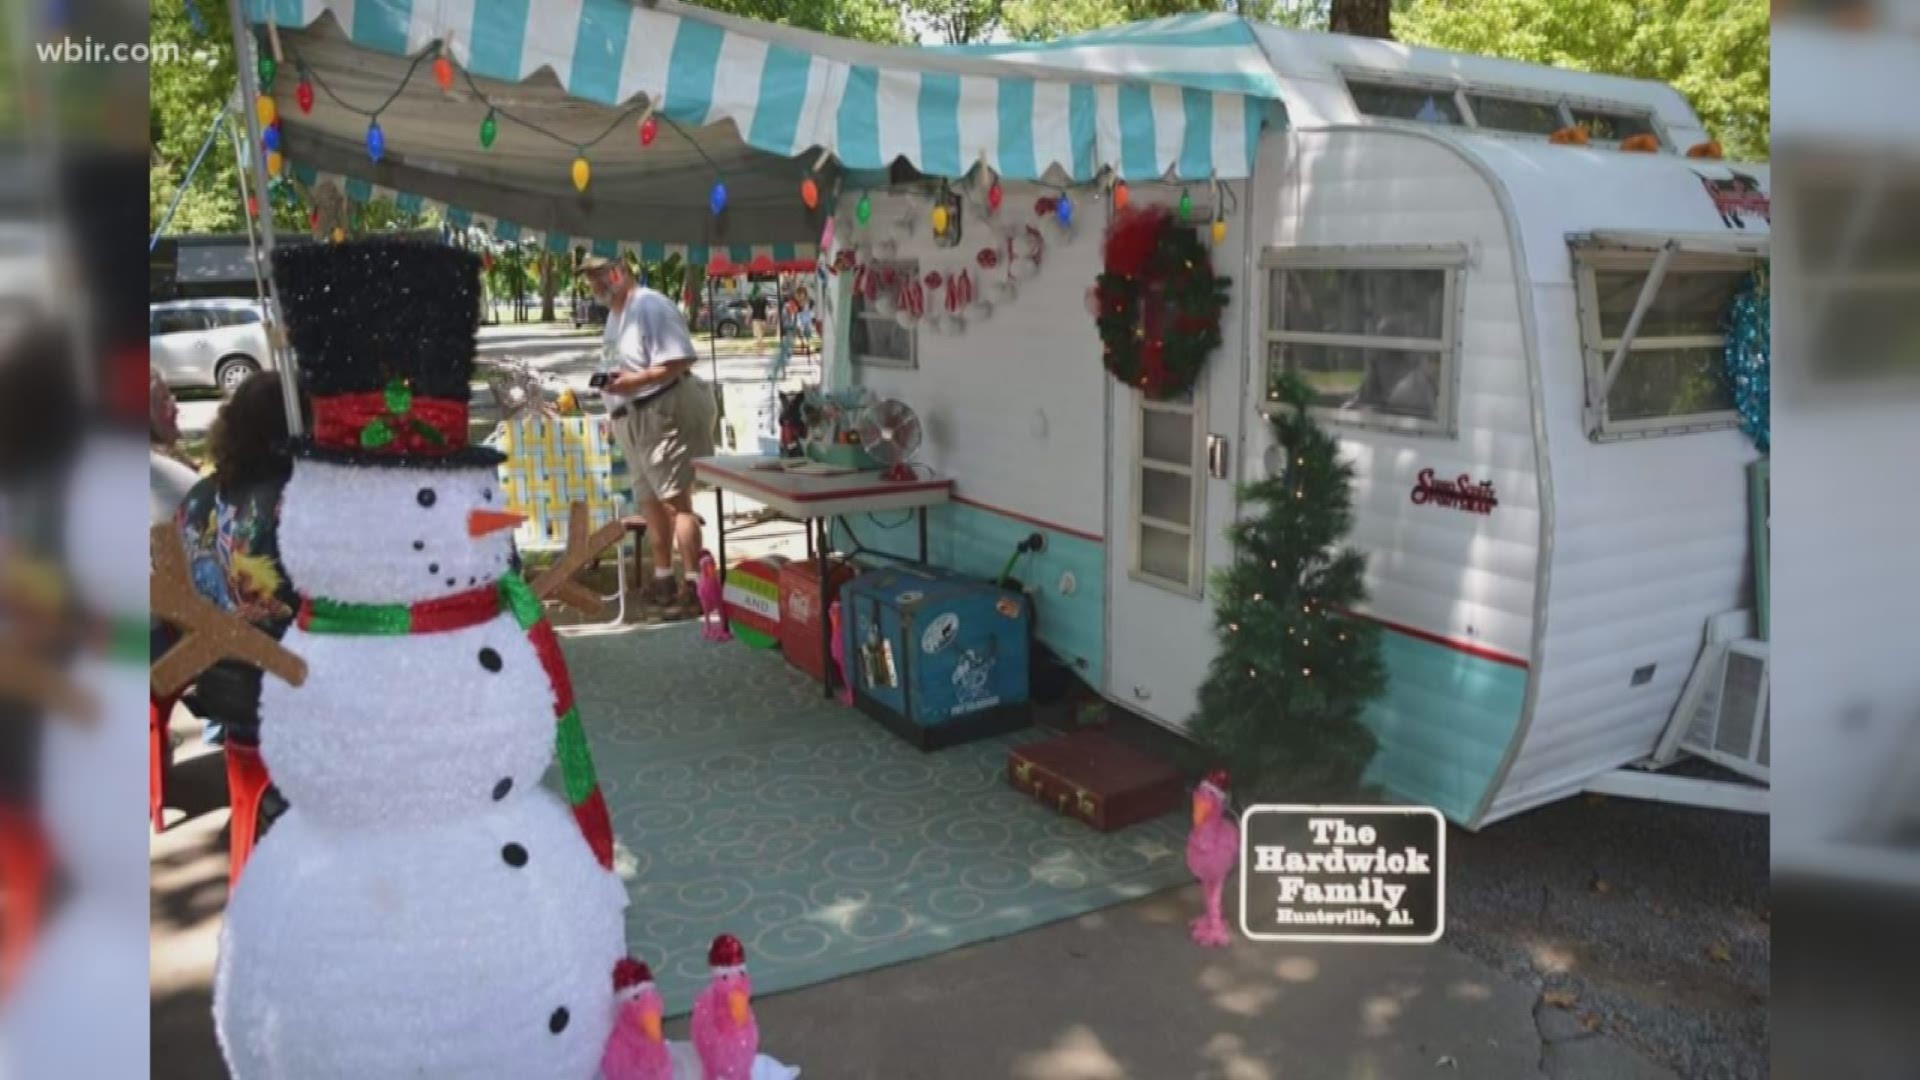 You can tour over 50 vintage trailers decked up for the holidays during Audrey's Jingle in July. The event is July 20 at River Plantation RV Resort
(1004 Parkway in Sevierville) from 11am to 4pm. Cost is $5 per person. 100% of the proceeds will go to Evergreen Elves in Sevier County. July 16, 2019-4pm.